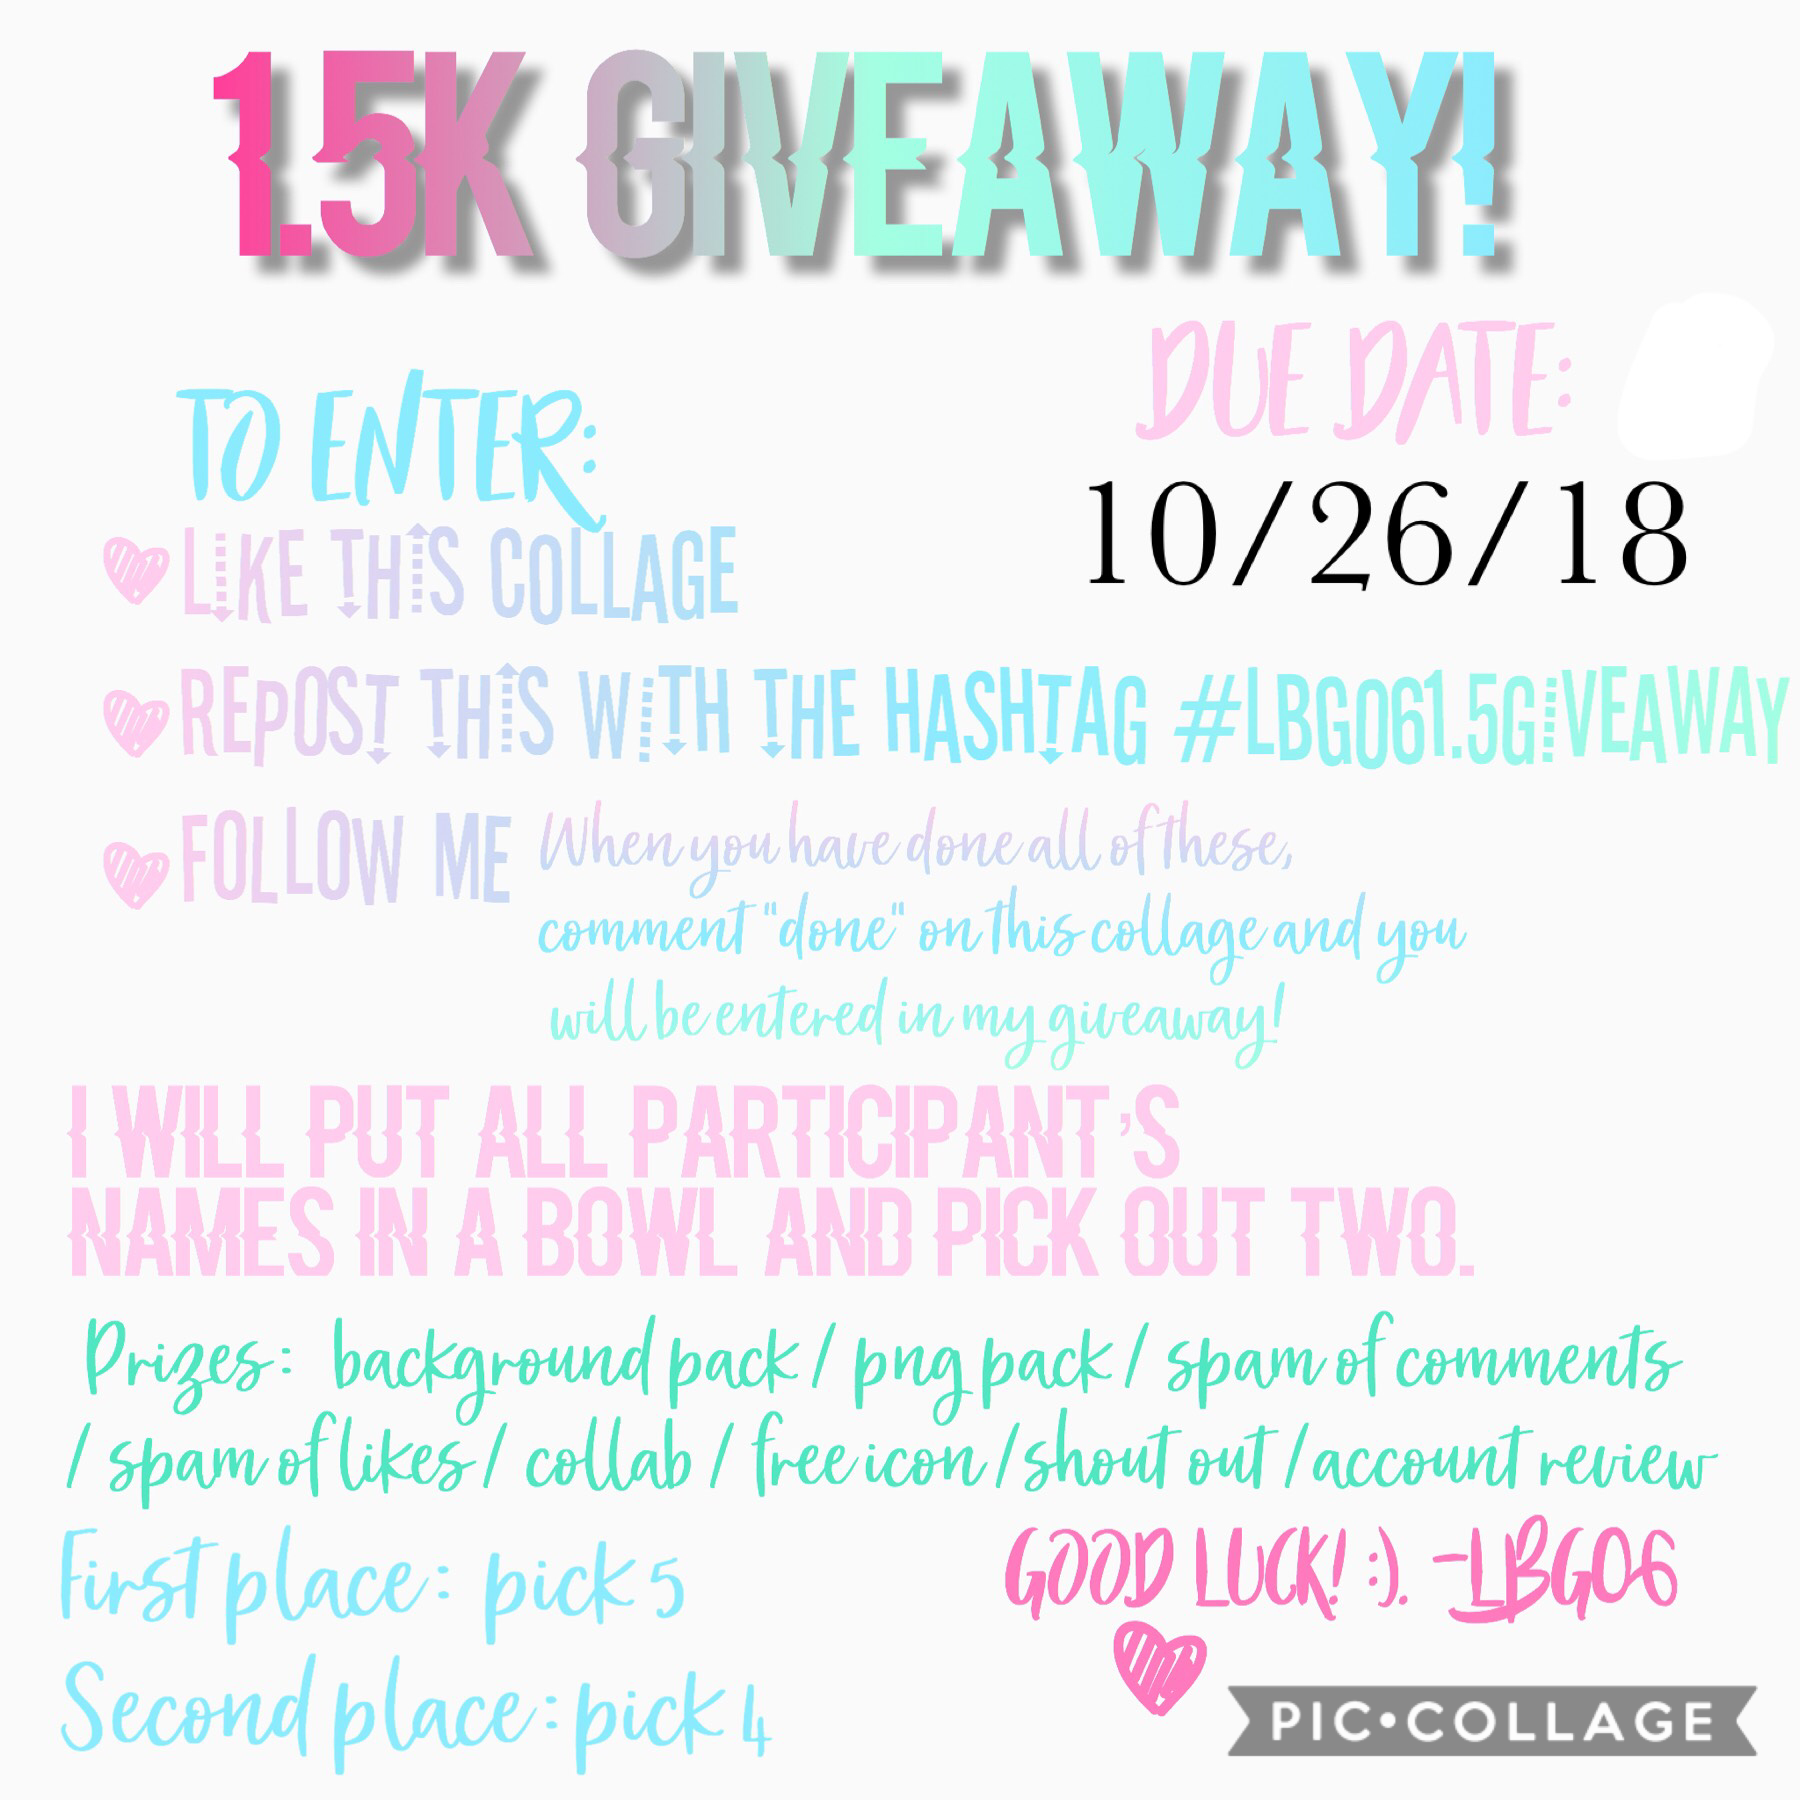 TAP

1.5K GIVAWAY!!!!!

QOTD: what sport do you play?
AOTD: cross country! 🏃🏼‍♀️ I just came back from out first meet and I was 99% sure I was gonna faint..but I didn’t 😂 I was so dizzy! Btw I was the 10th out of the girls! 👏🏻😁

Good luck on this! Xoxo❤️❤